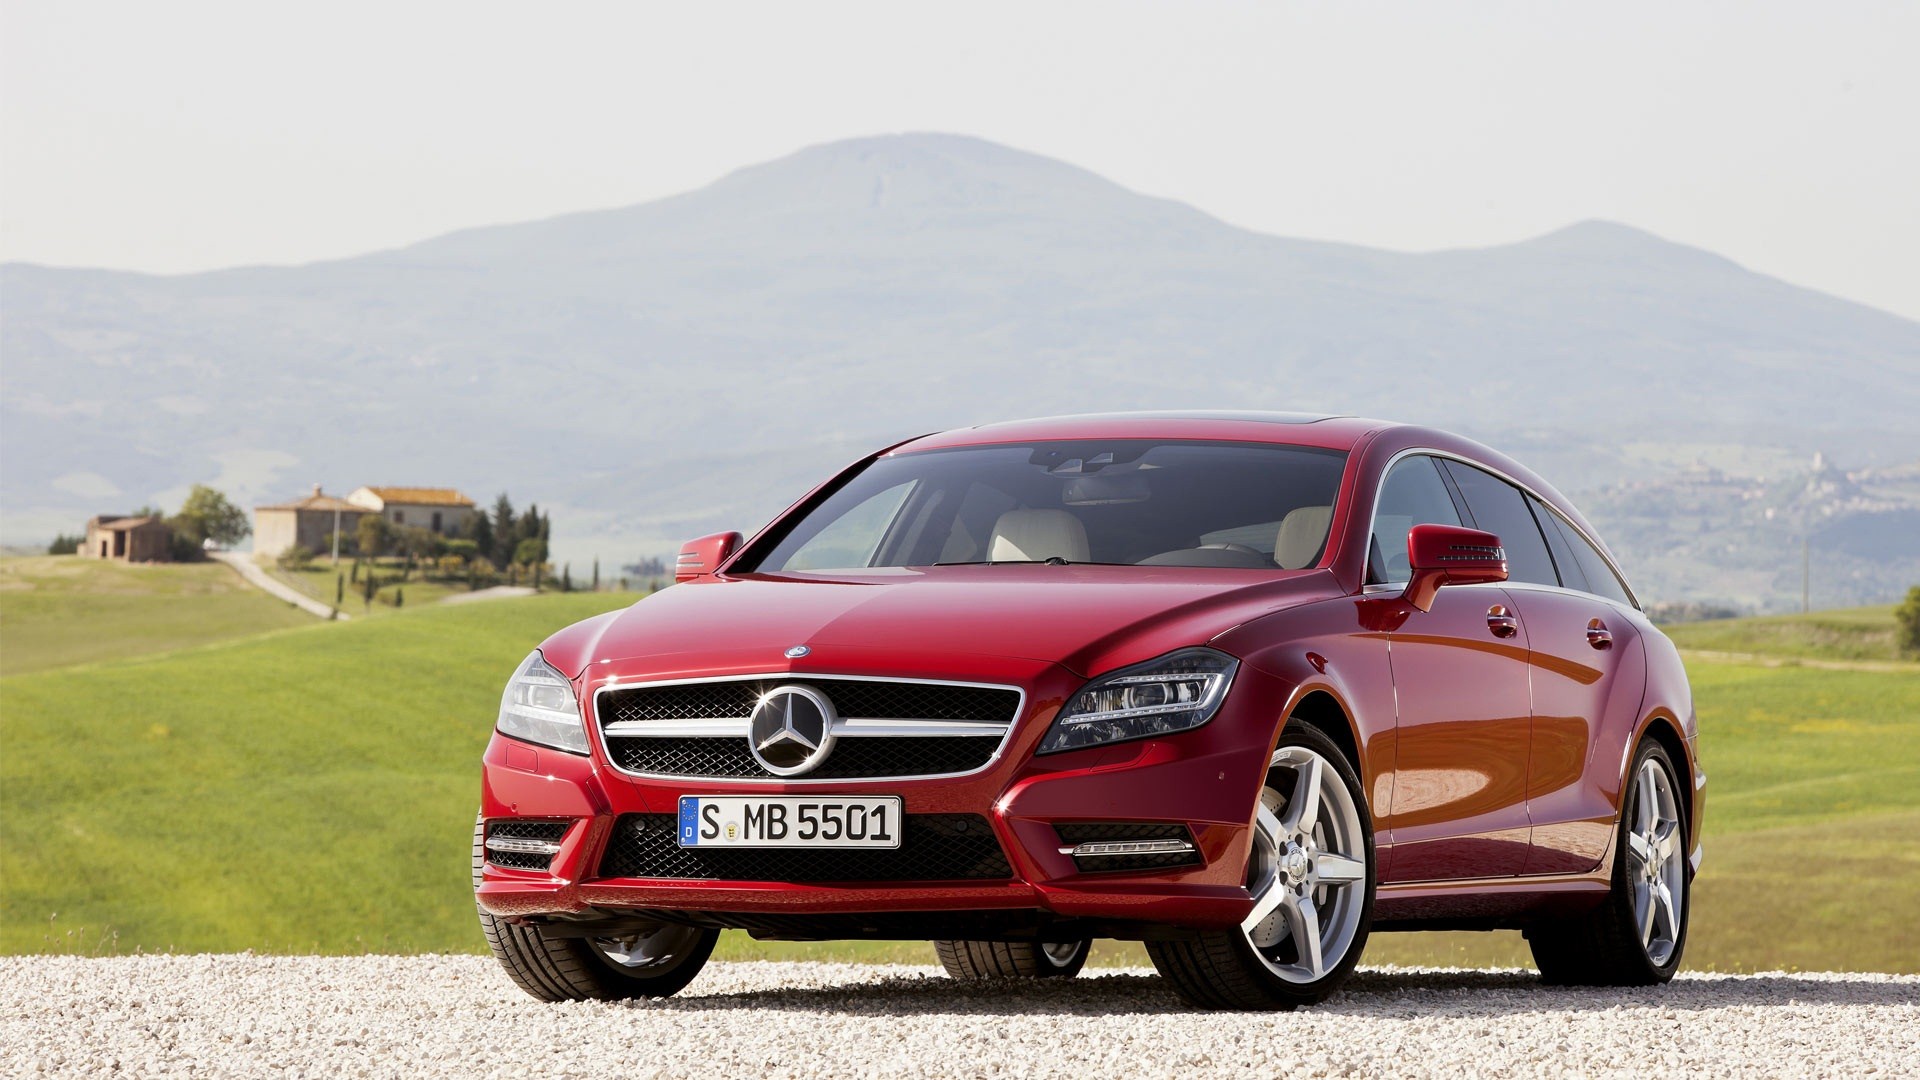 cars, Shooting, Red, Cars, Mercedes benz, Cls class, German, Cars, Cls Wallpaper